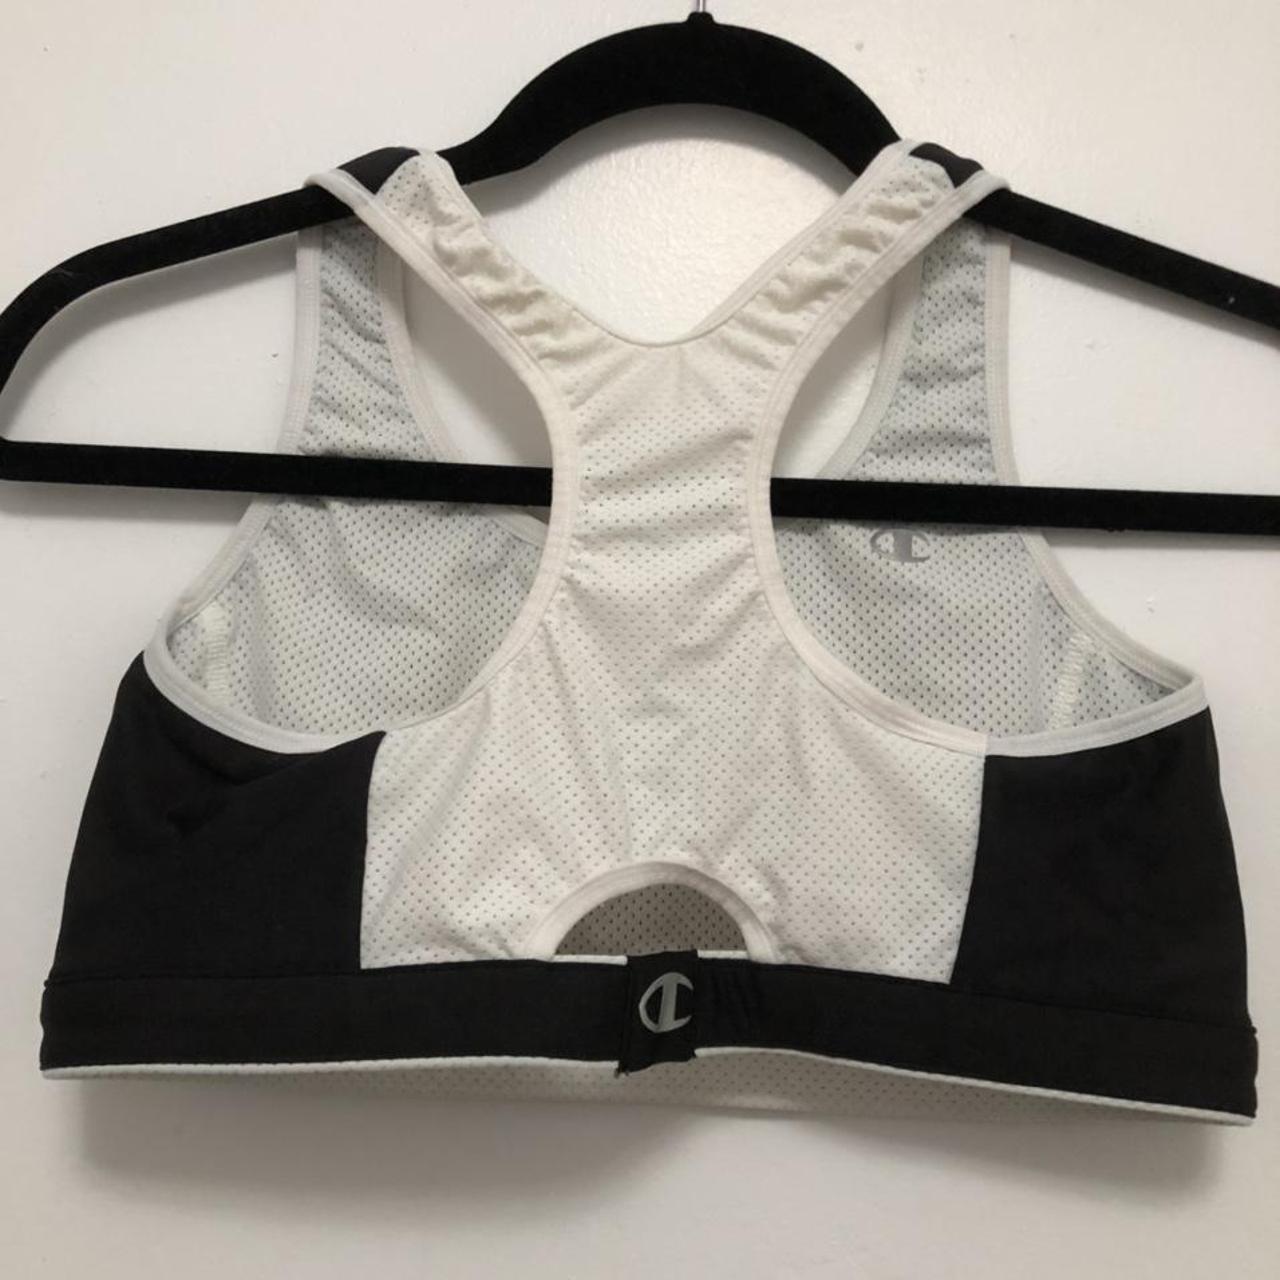 Champion Sports Bra, Worn only a couple of times but